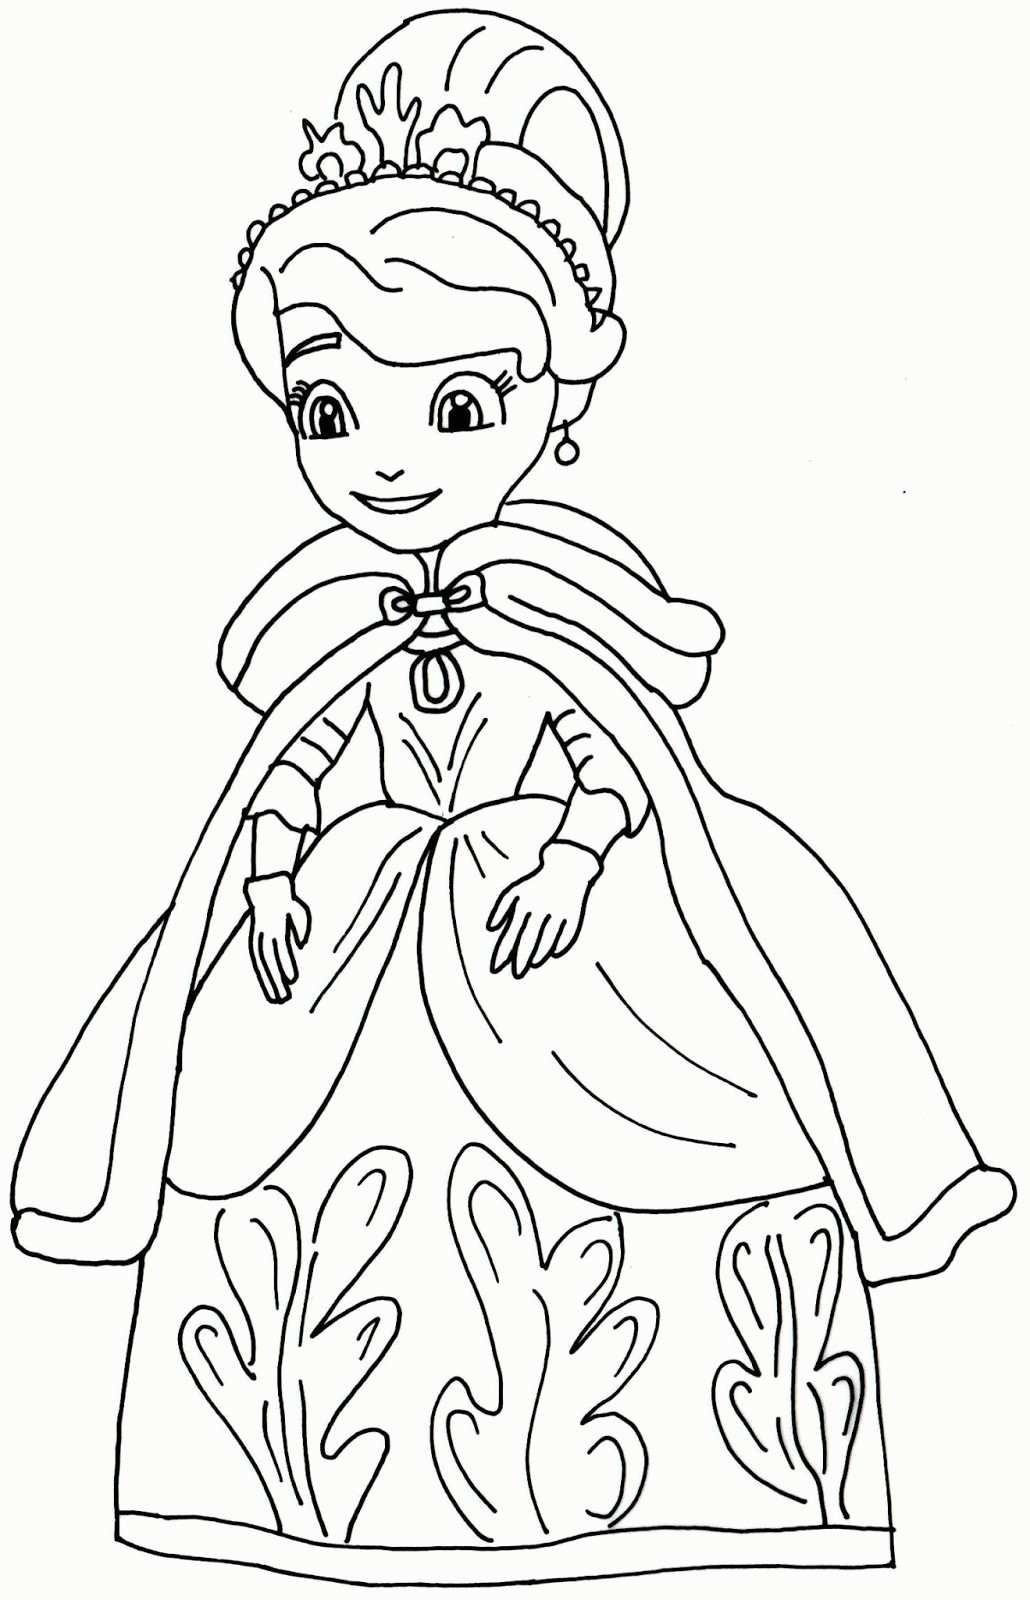 Sofia The First Printable Coloring Pages
 Sofia the First Coloring Pages Best Coloring Pages For Kids